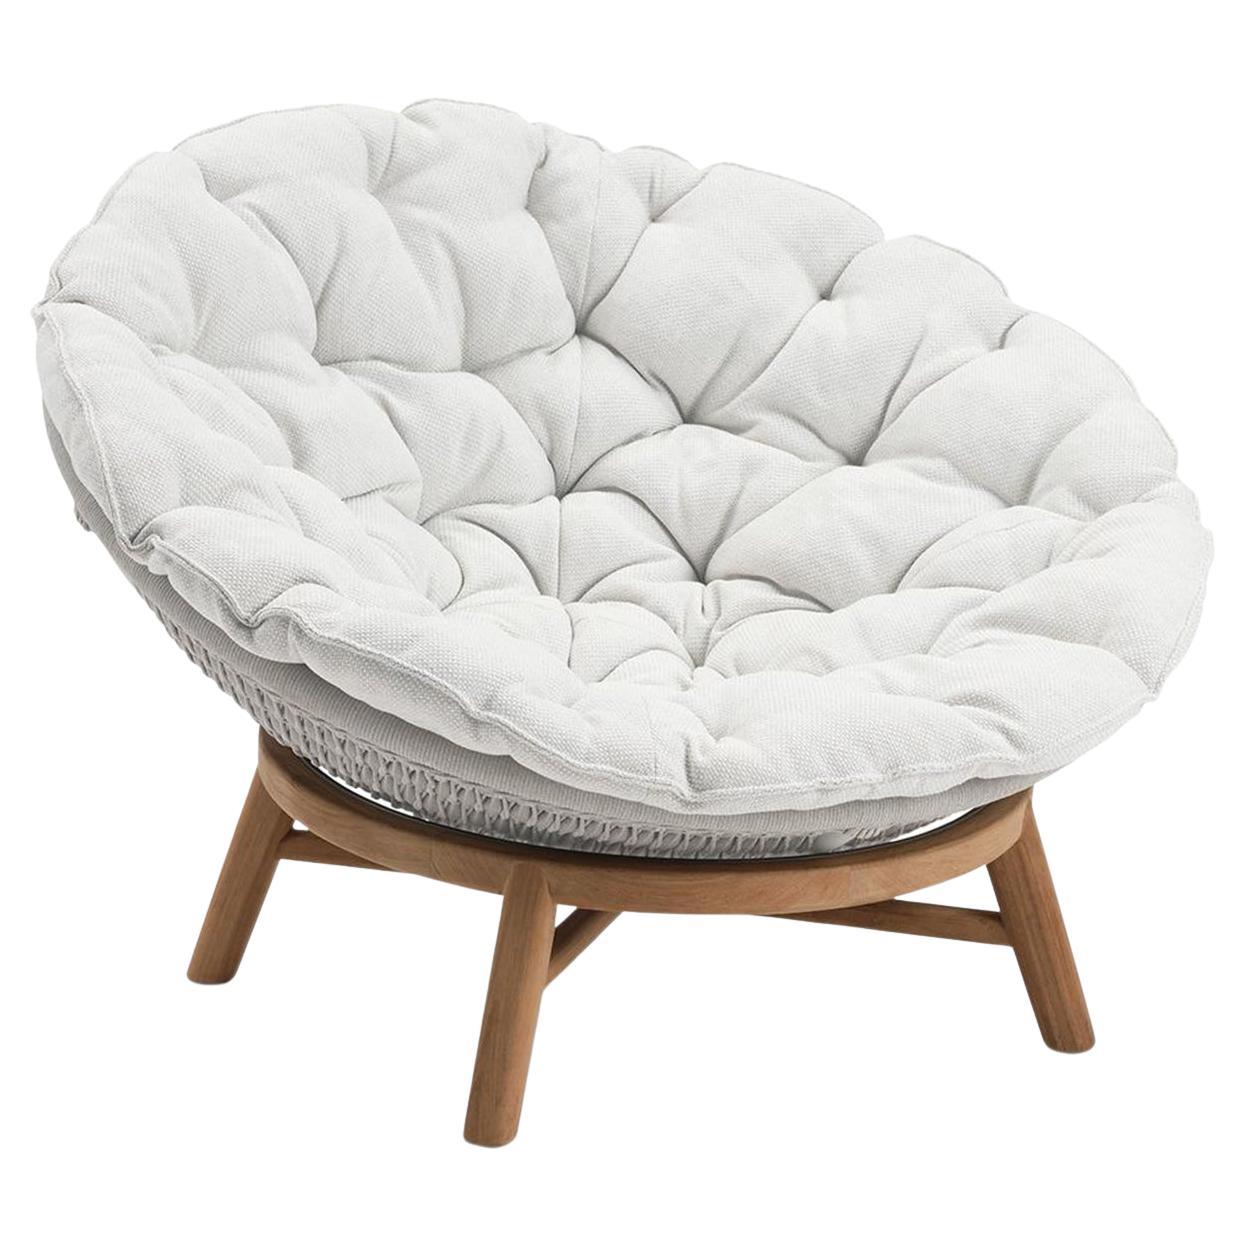 Lonam Natura Daybed For Sale